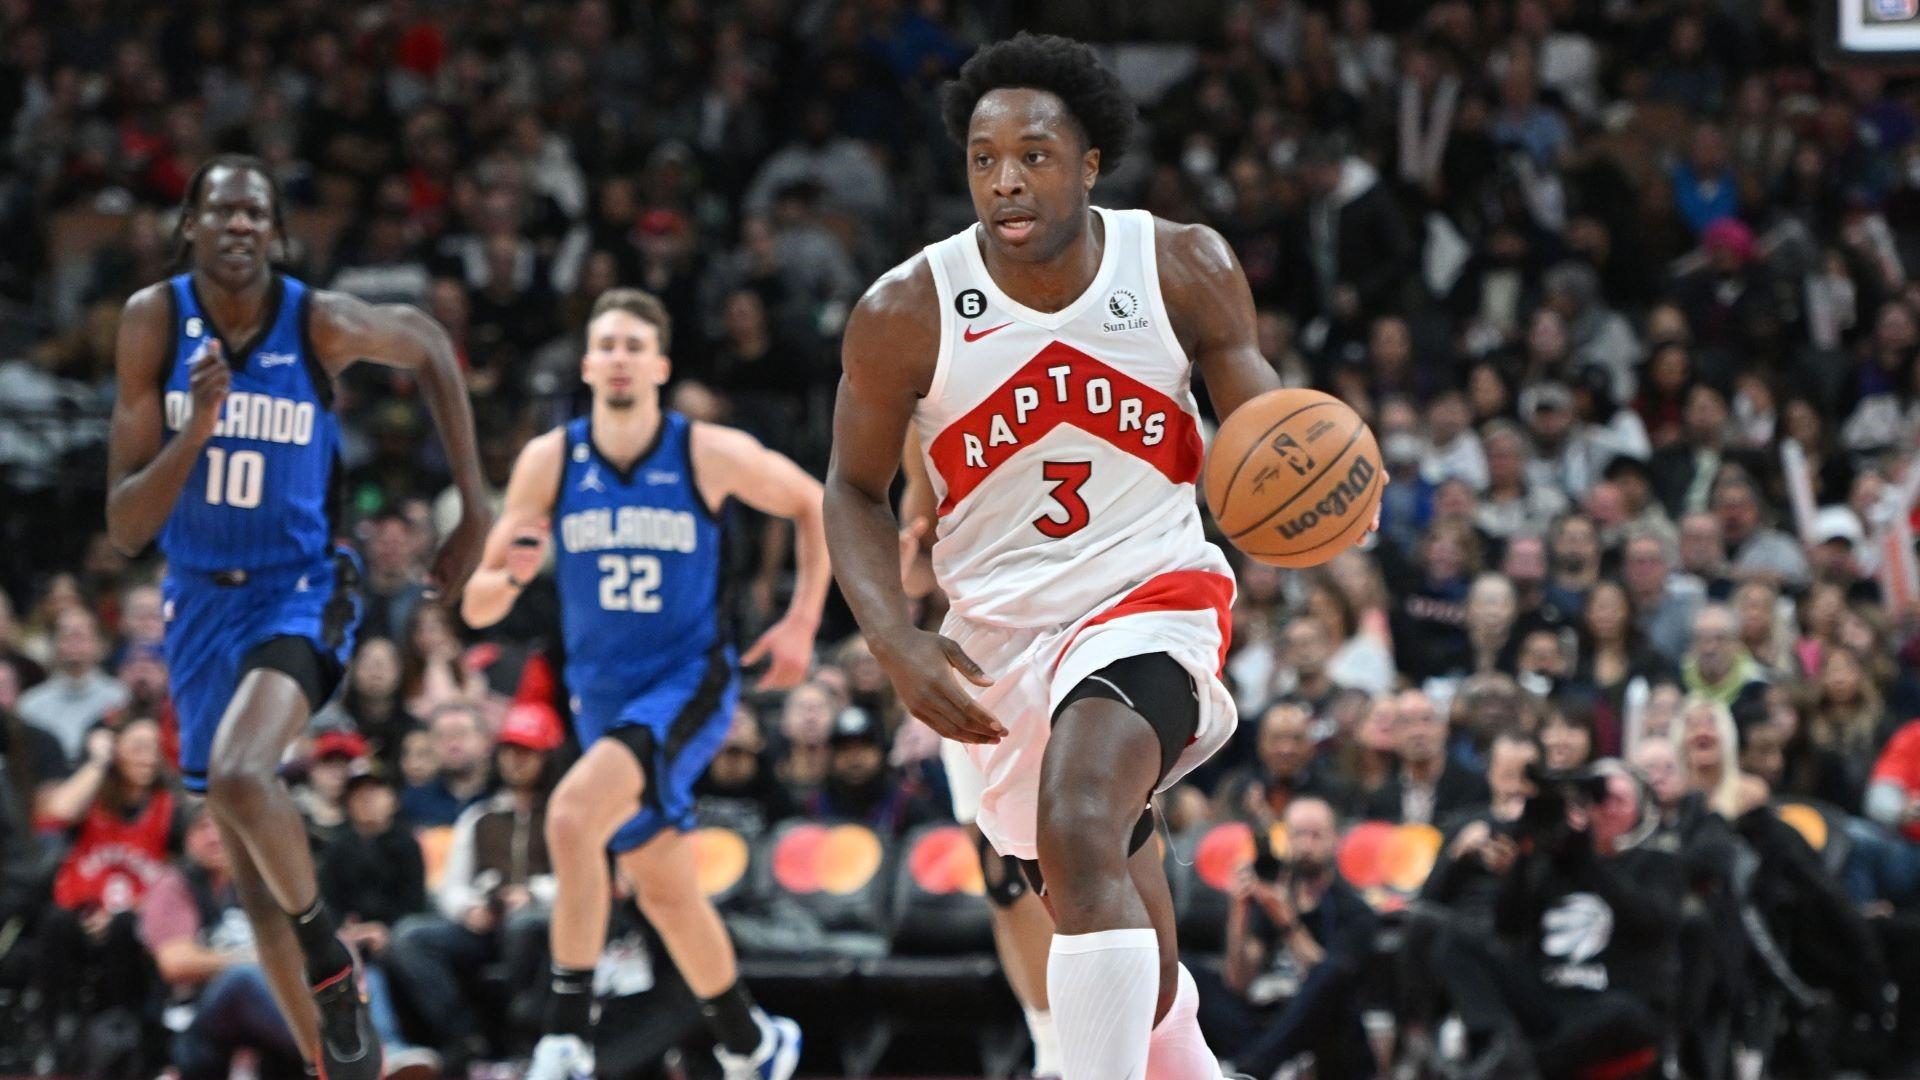 Dec 3, 2022; Toronto, Ontario, CAN; Toronto Raptors forward OG Anunoby (3) dribbles the ball up court against the Orlando Magic in the second half at Scotiabank Arena. / Dan Hamilton-USA TODAY Sports